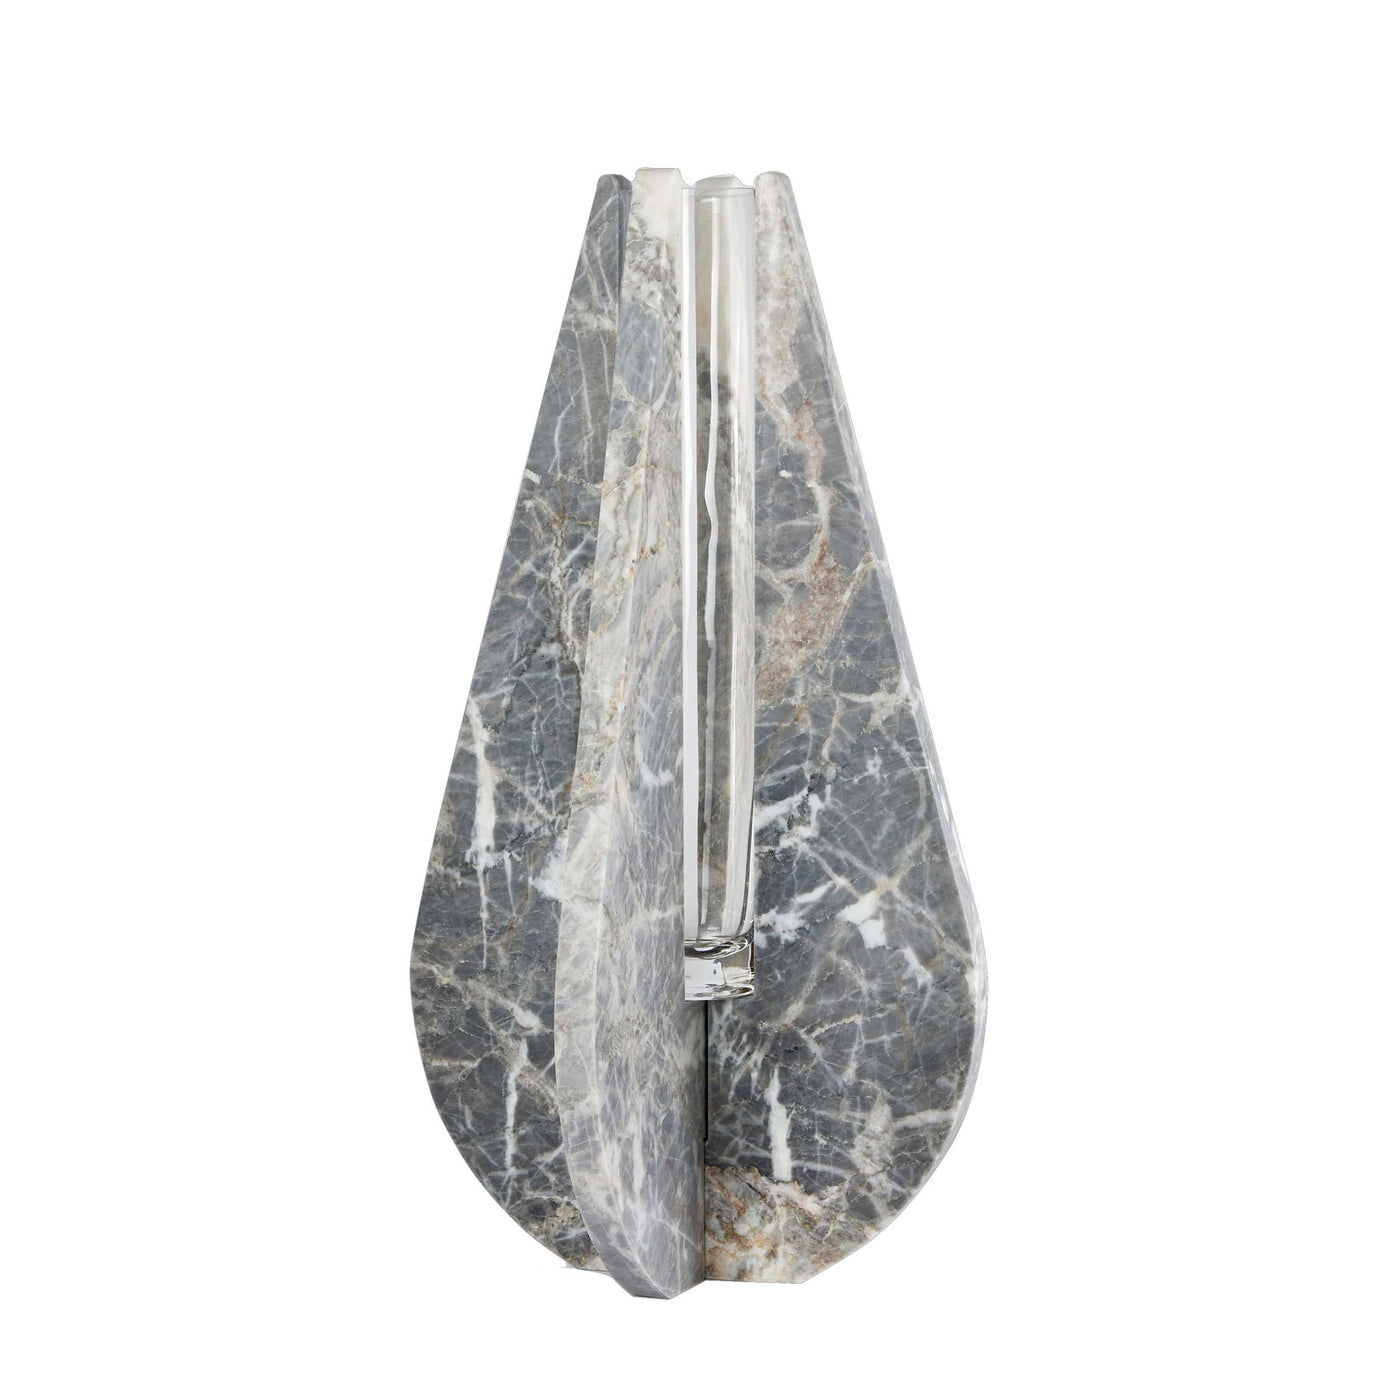 Marble Vase DROP by Alessandra Grasso for Kimano 06